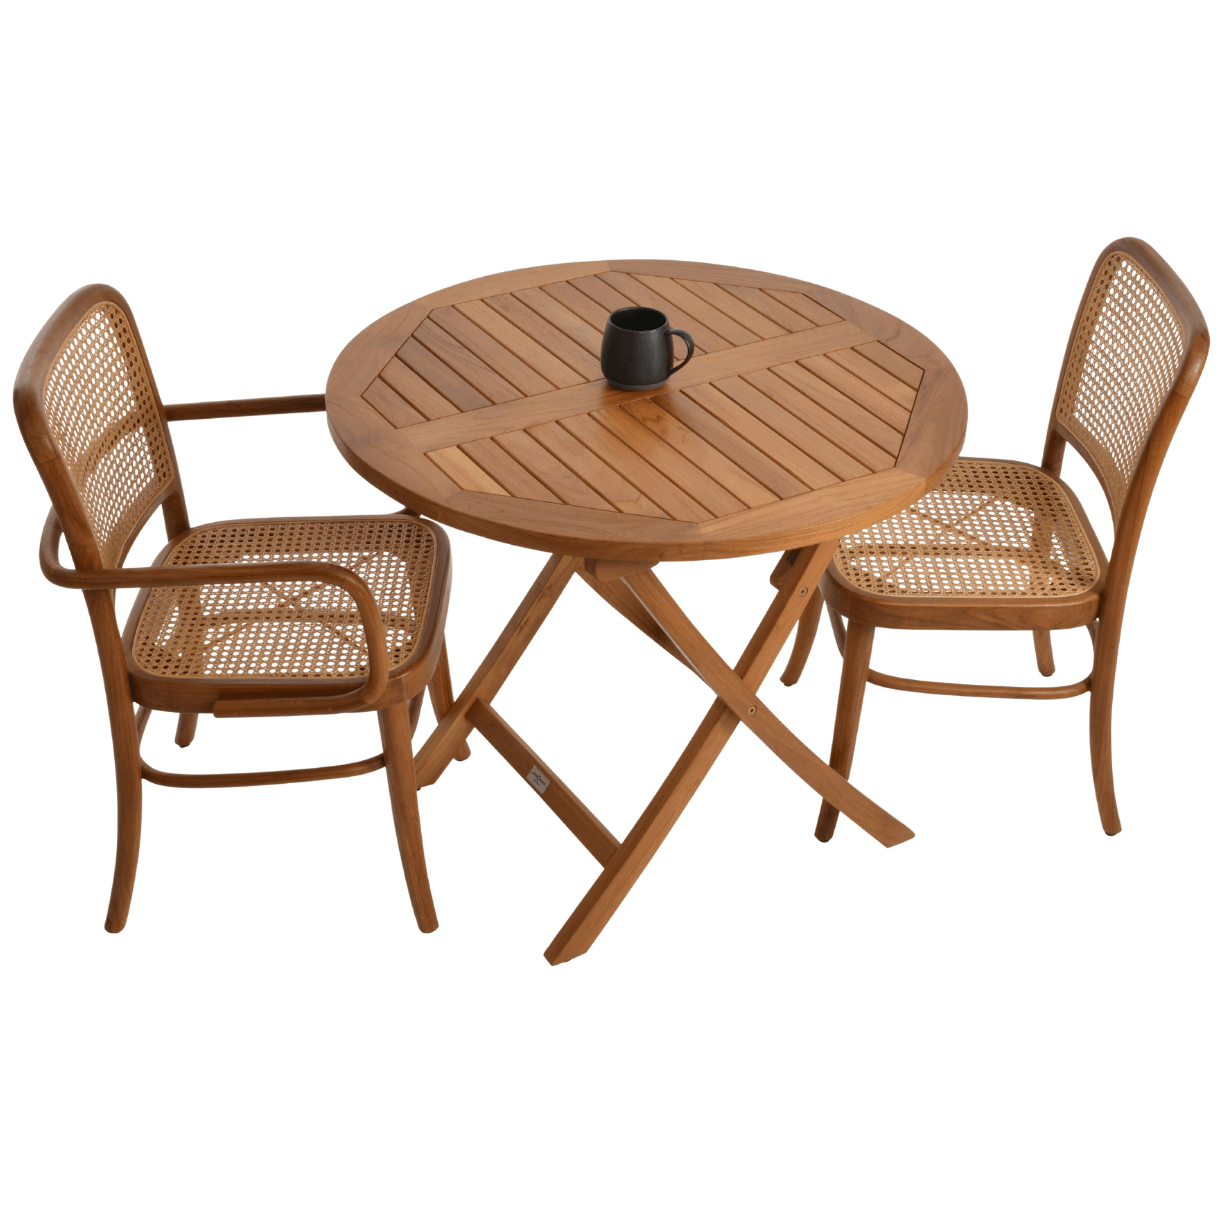 Round Patio Table For 2-4 People Pamela Folding - Your Bar Stools Canada